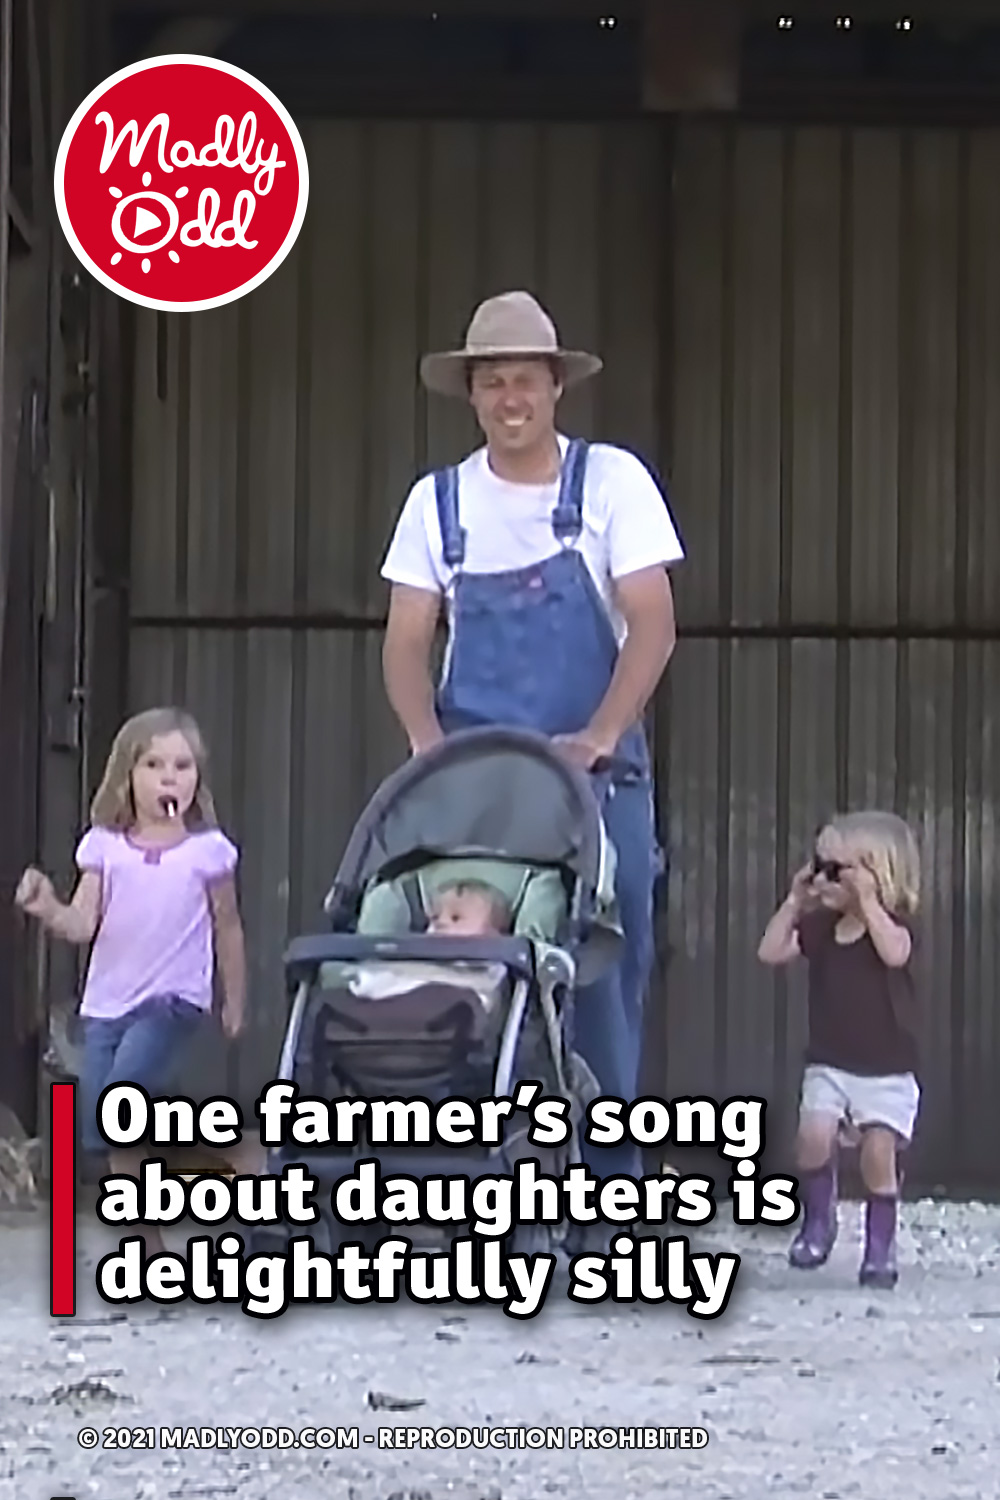 One farmer’s song about daughters is delightfully silly